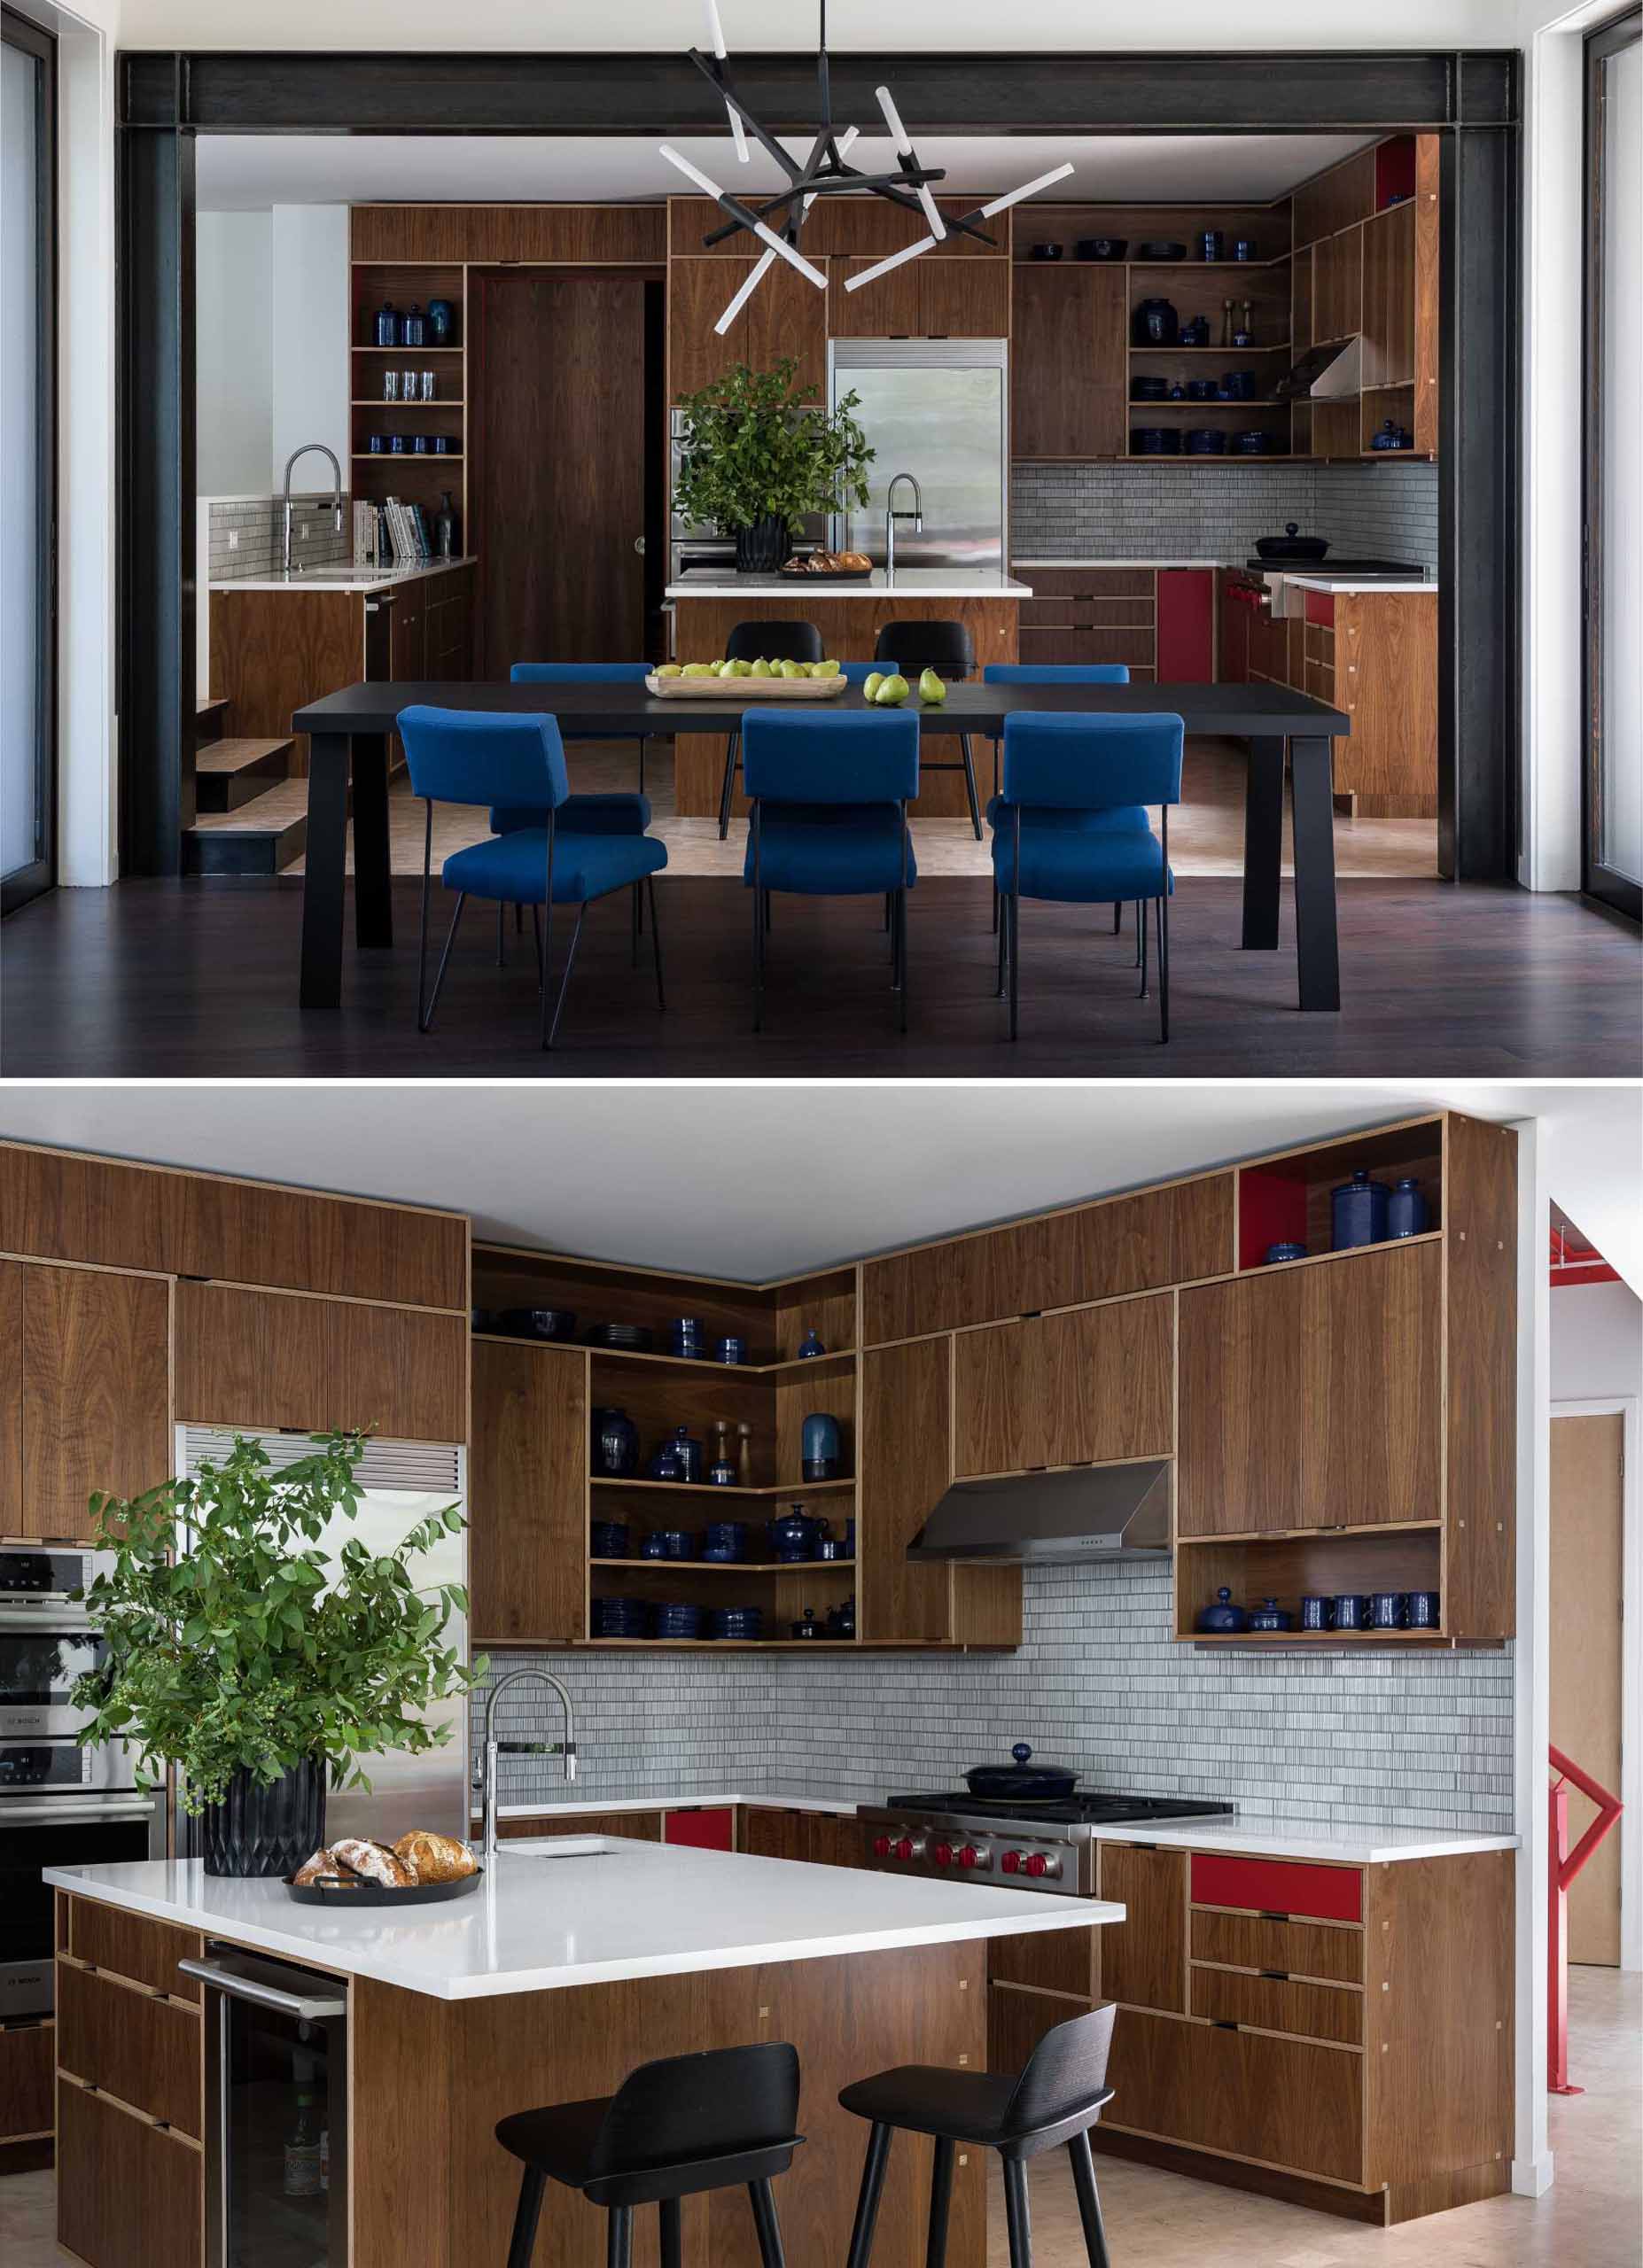 In this contemporary kitchen, wood cabinets and shelves that reach the ceiling are accented by red touches, and the island increases the amount of available counterspace.